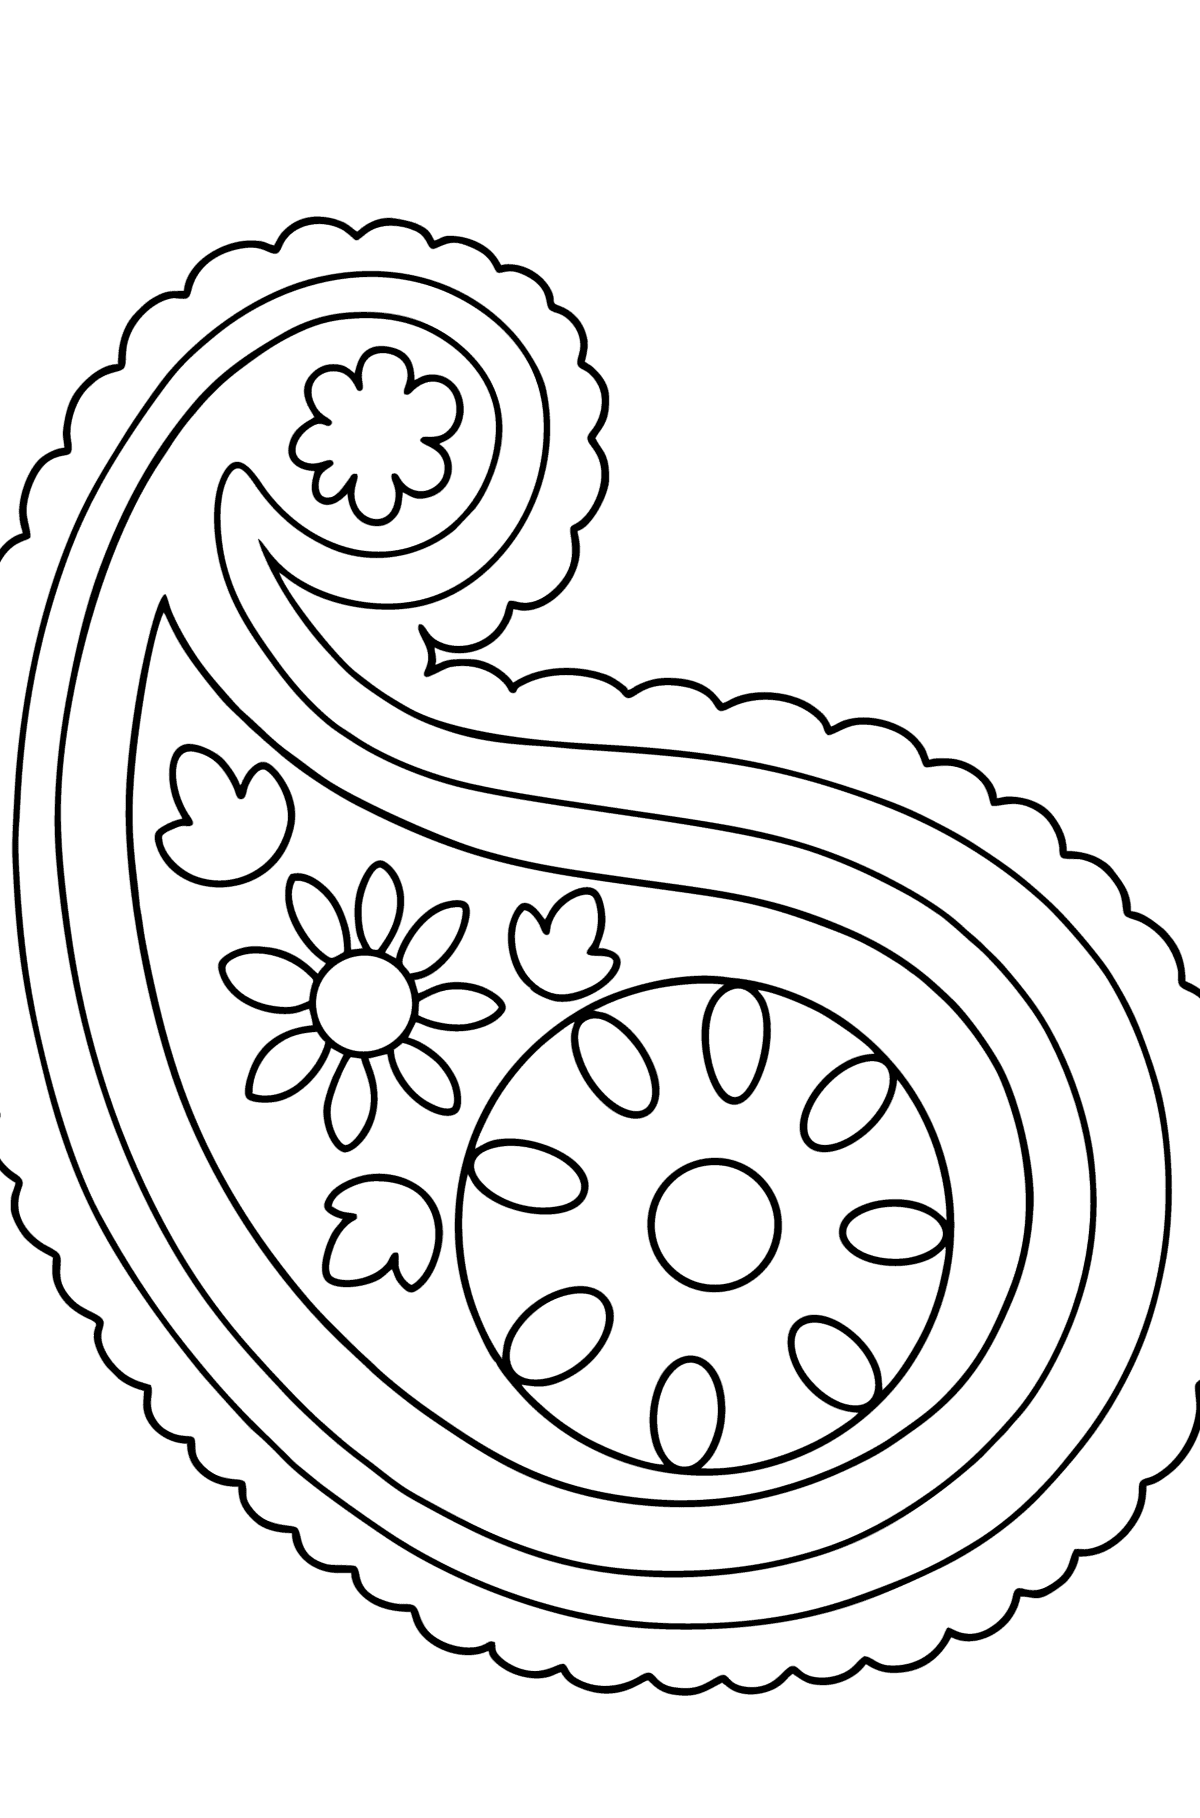 Cute Paisley coloring page - Coloring Pages for Kids